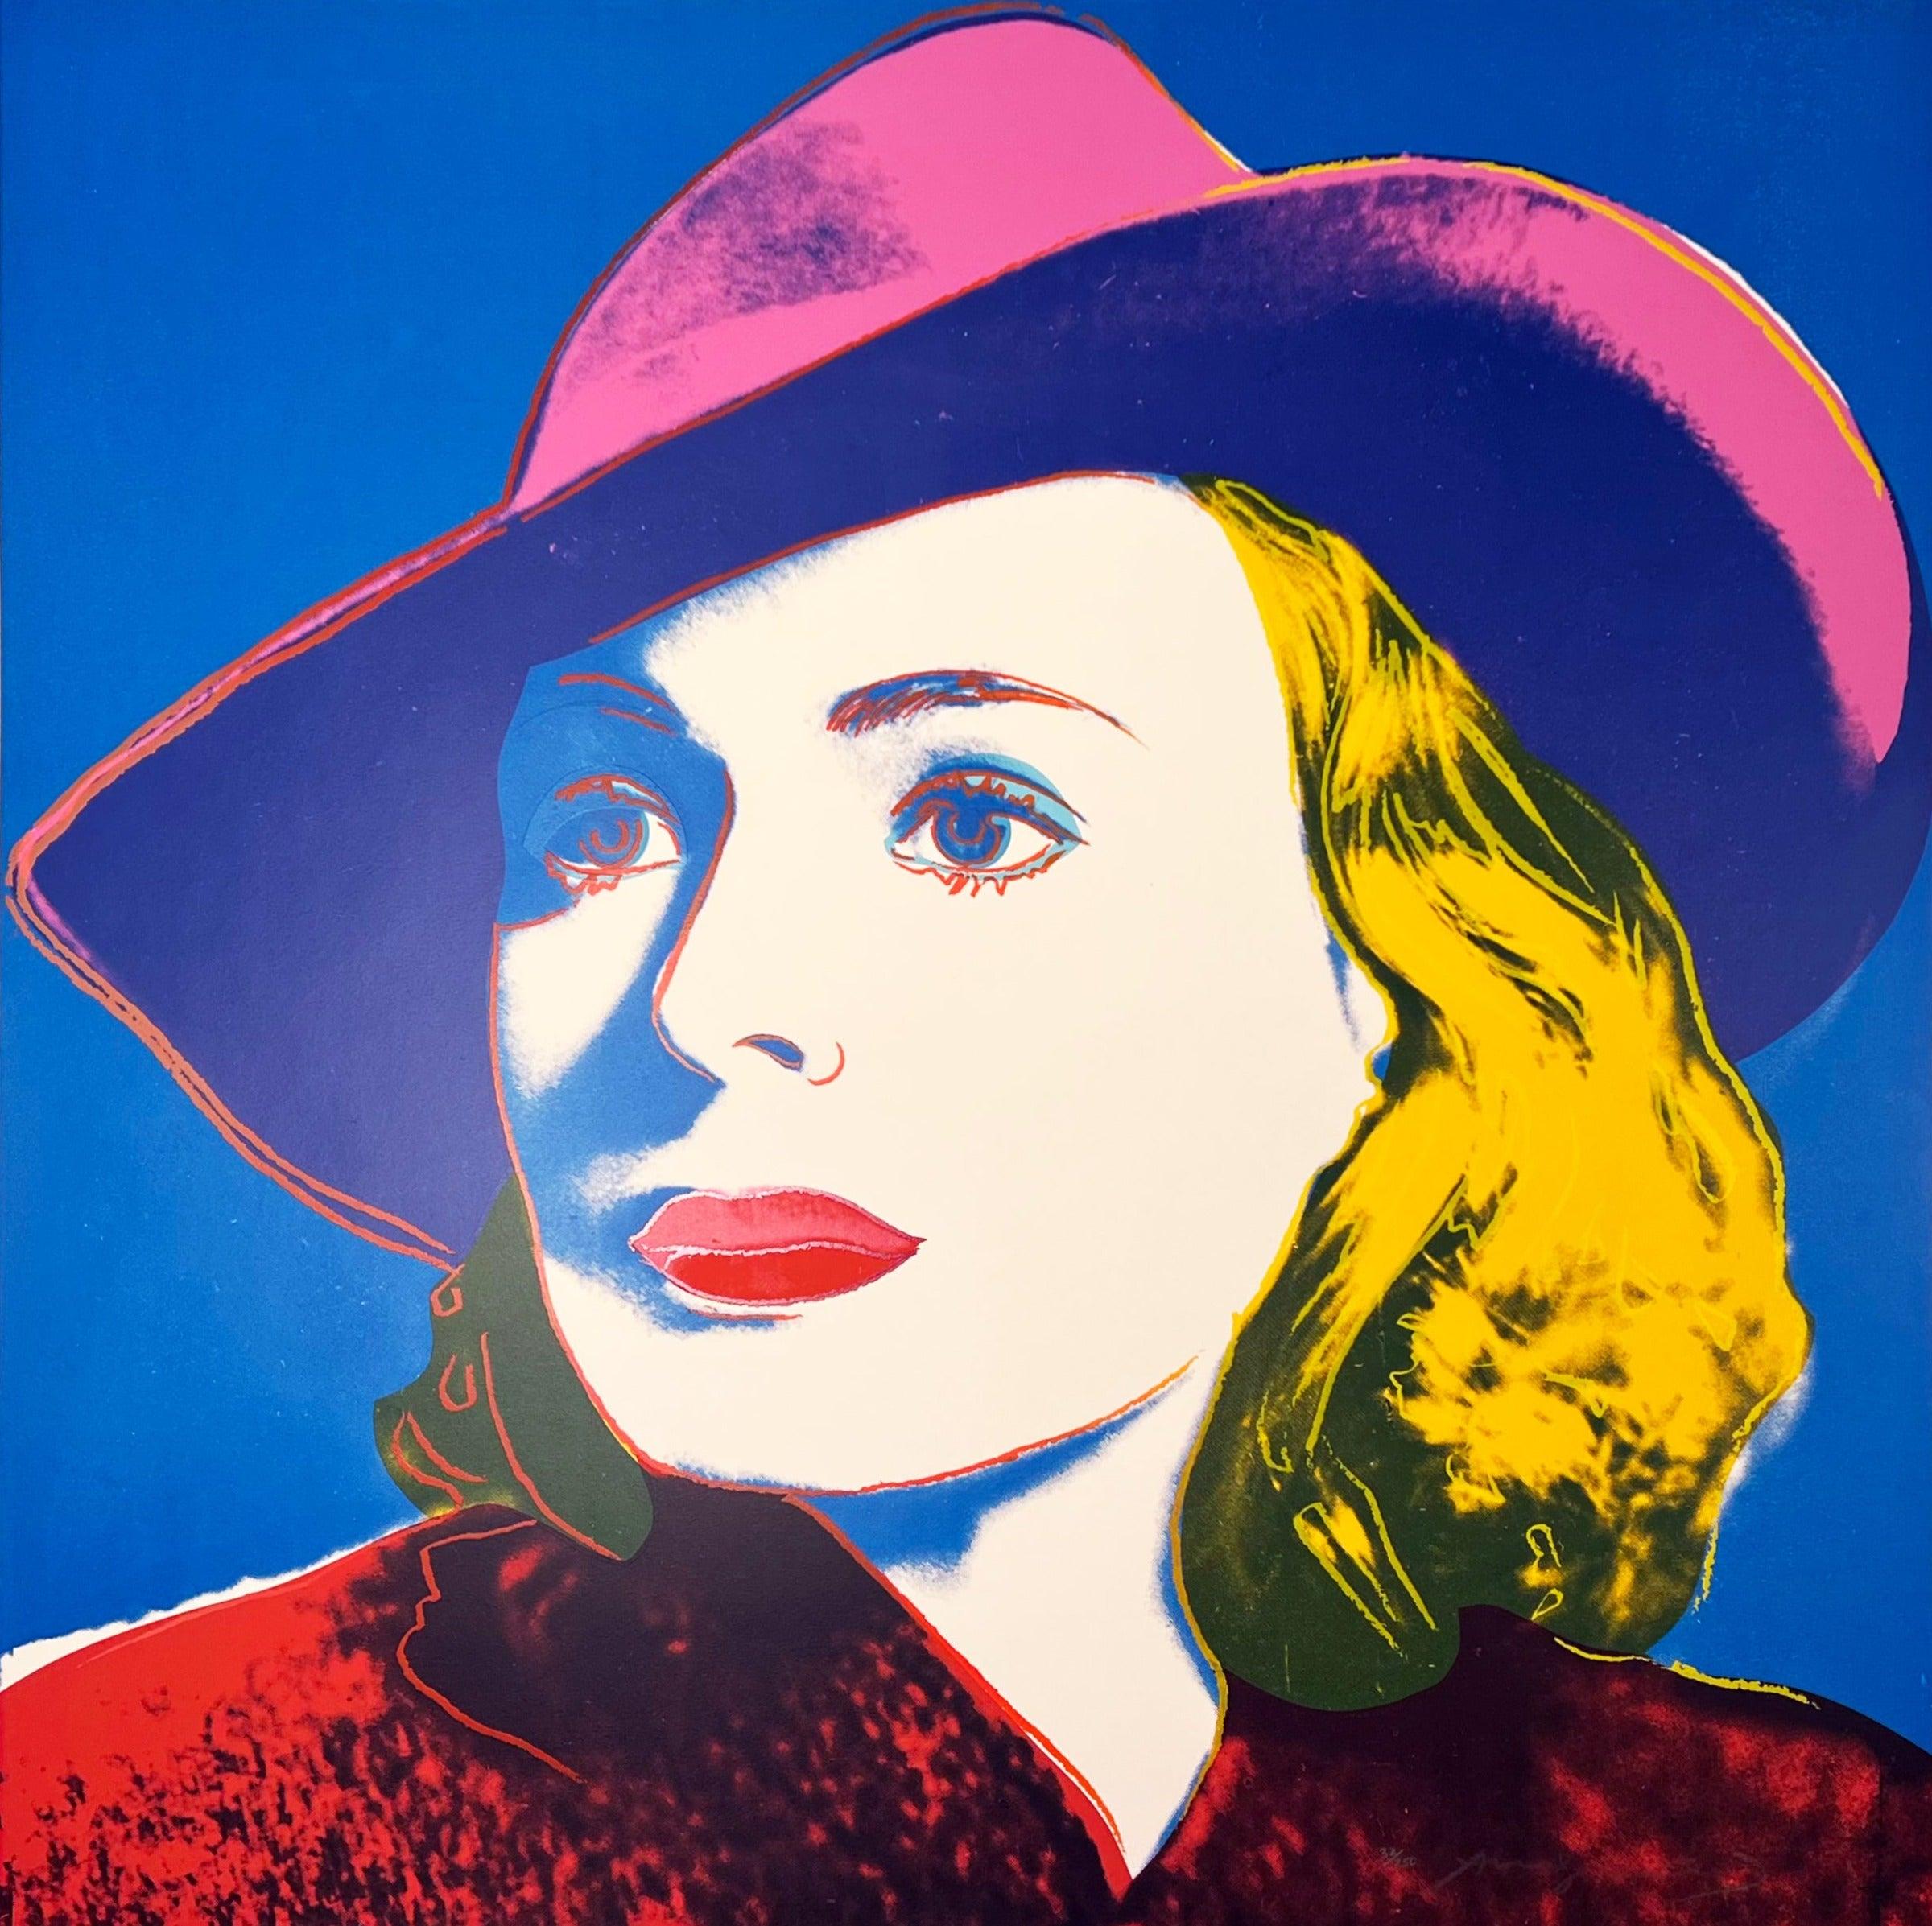 What is Andy Warhol's most famous art piece?